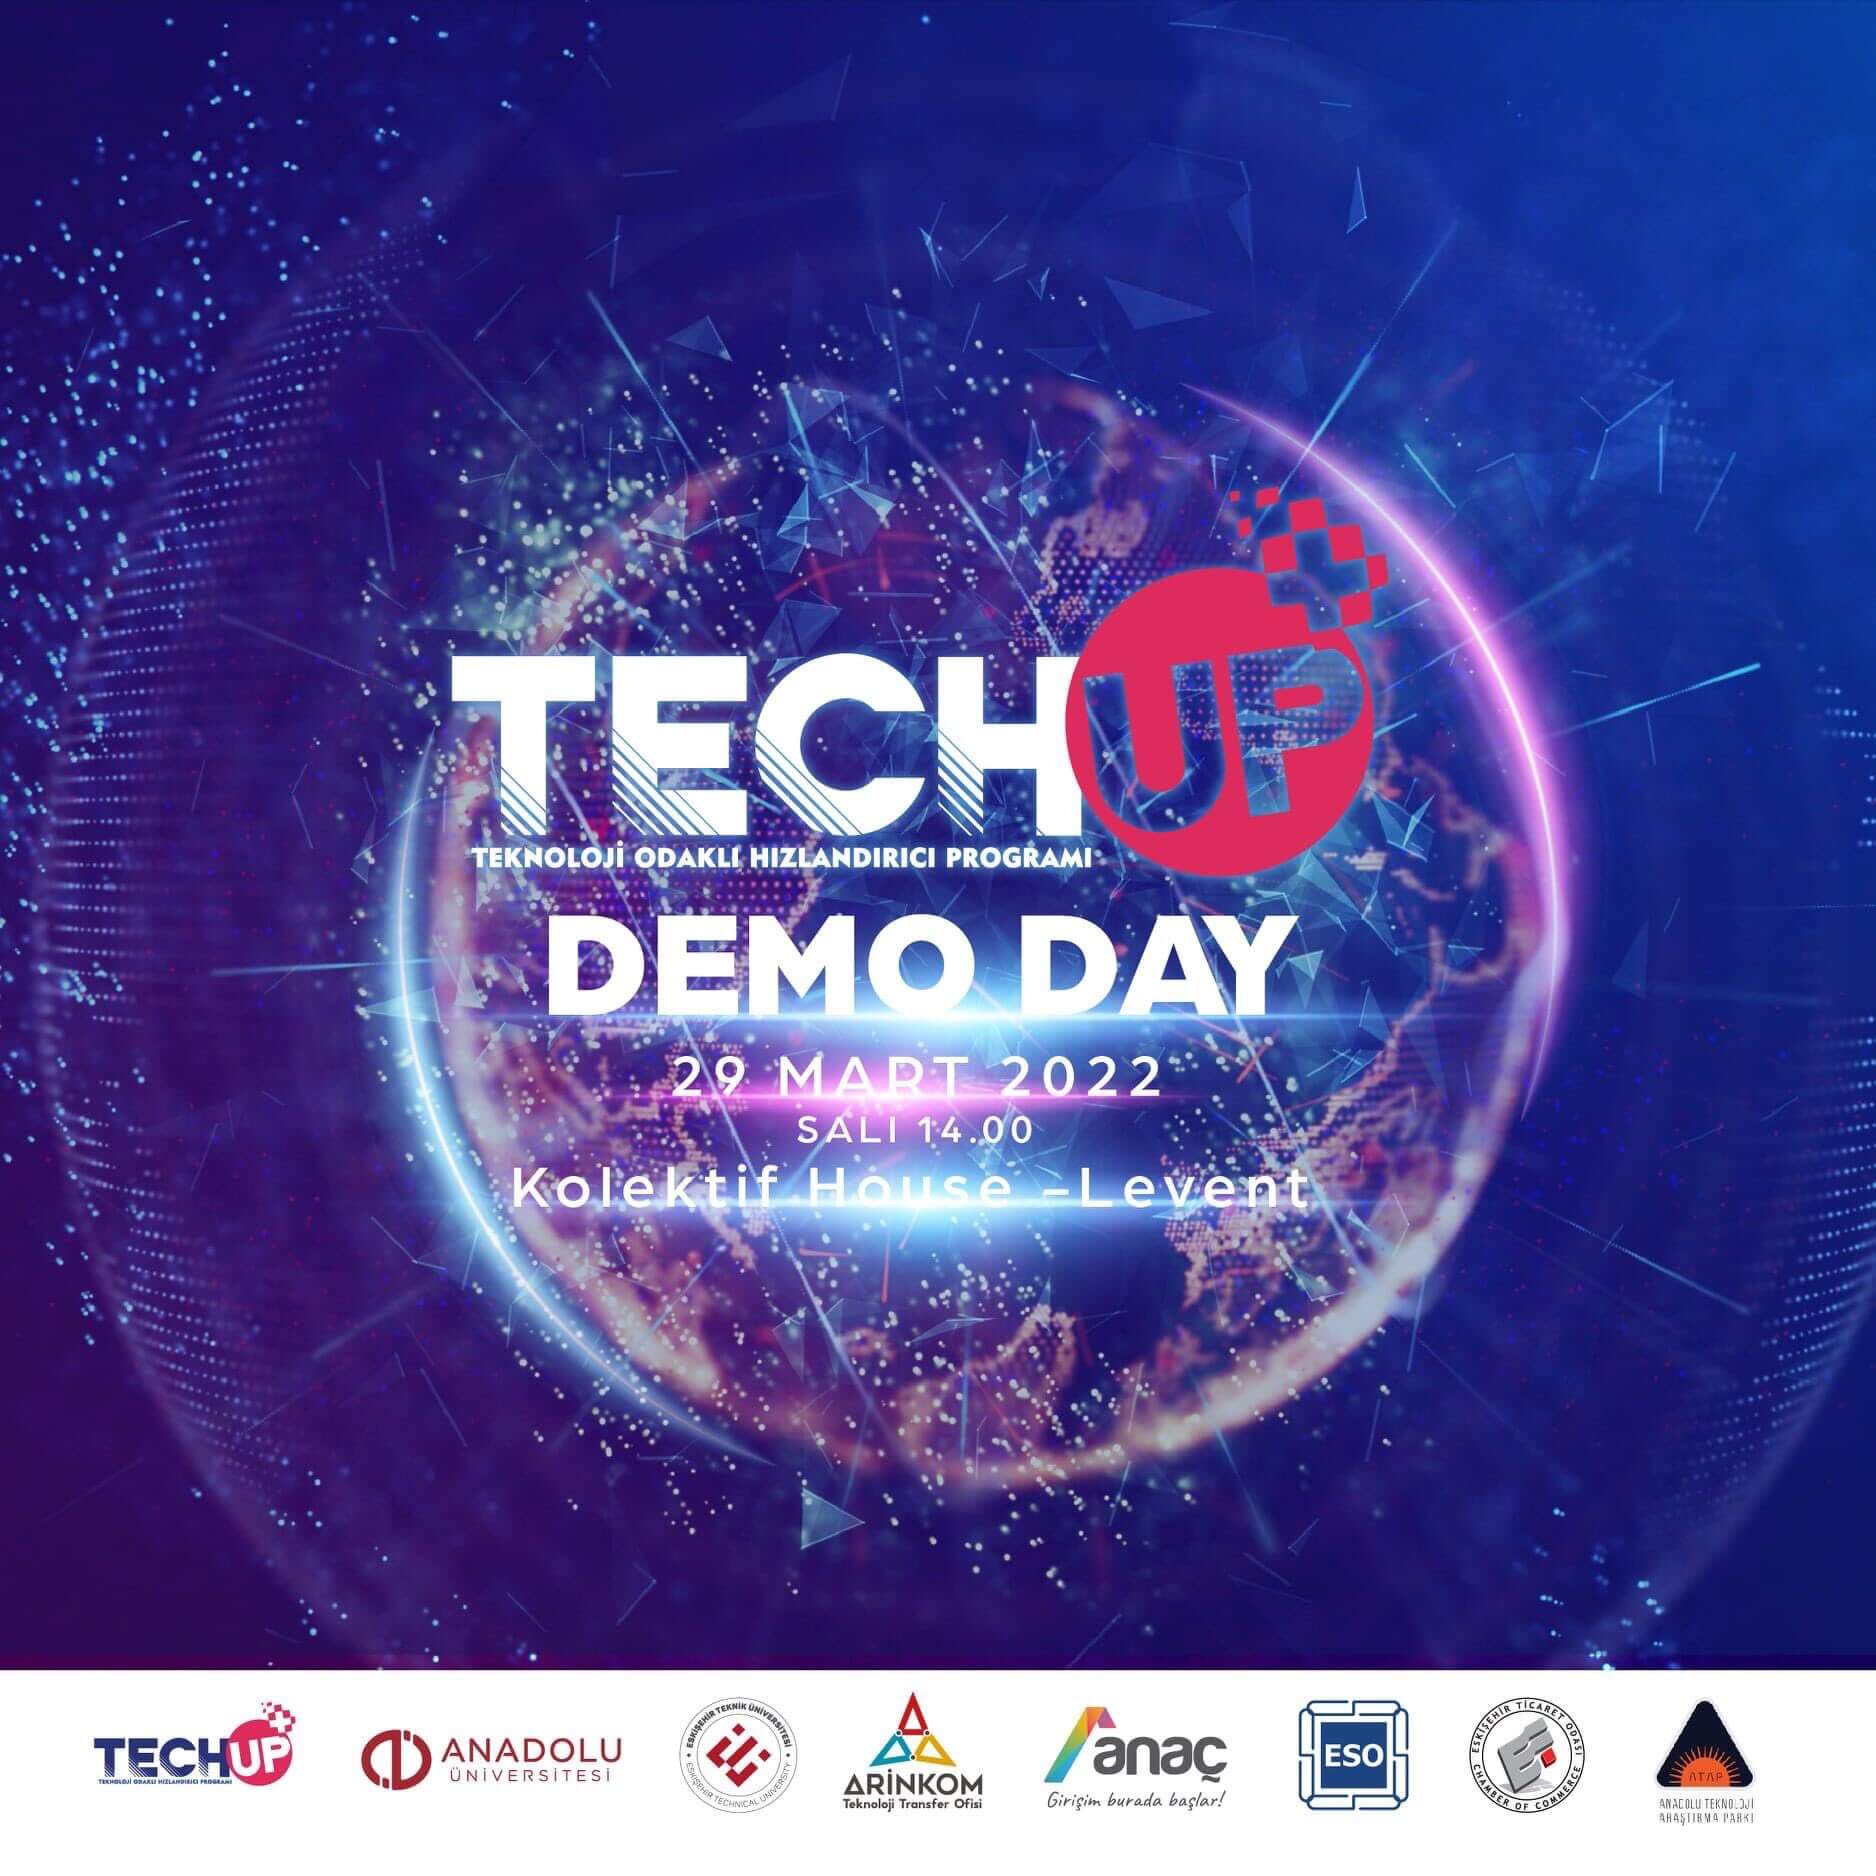 CranioCatch takes its place at TechUp, meets you with Demo Day!